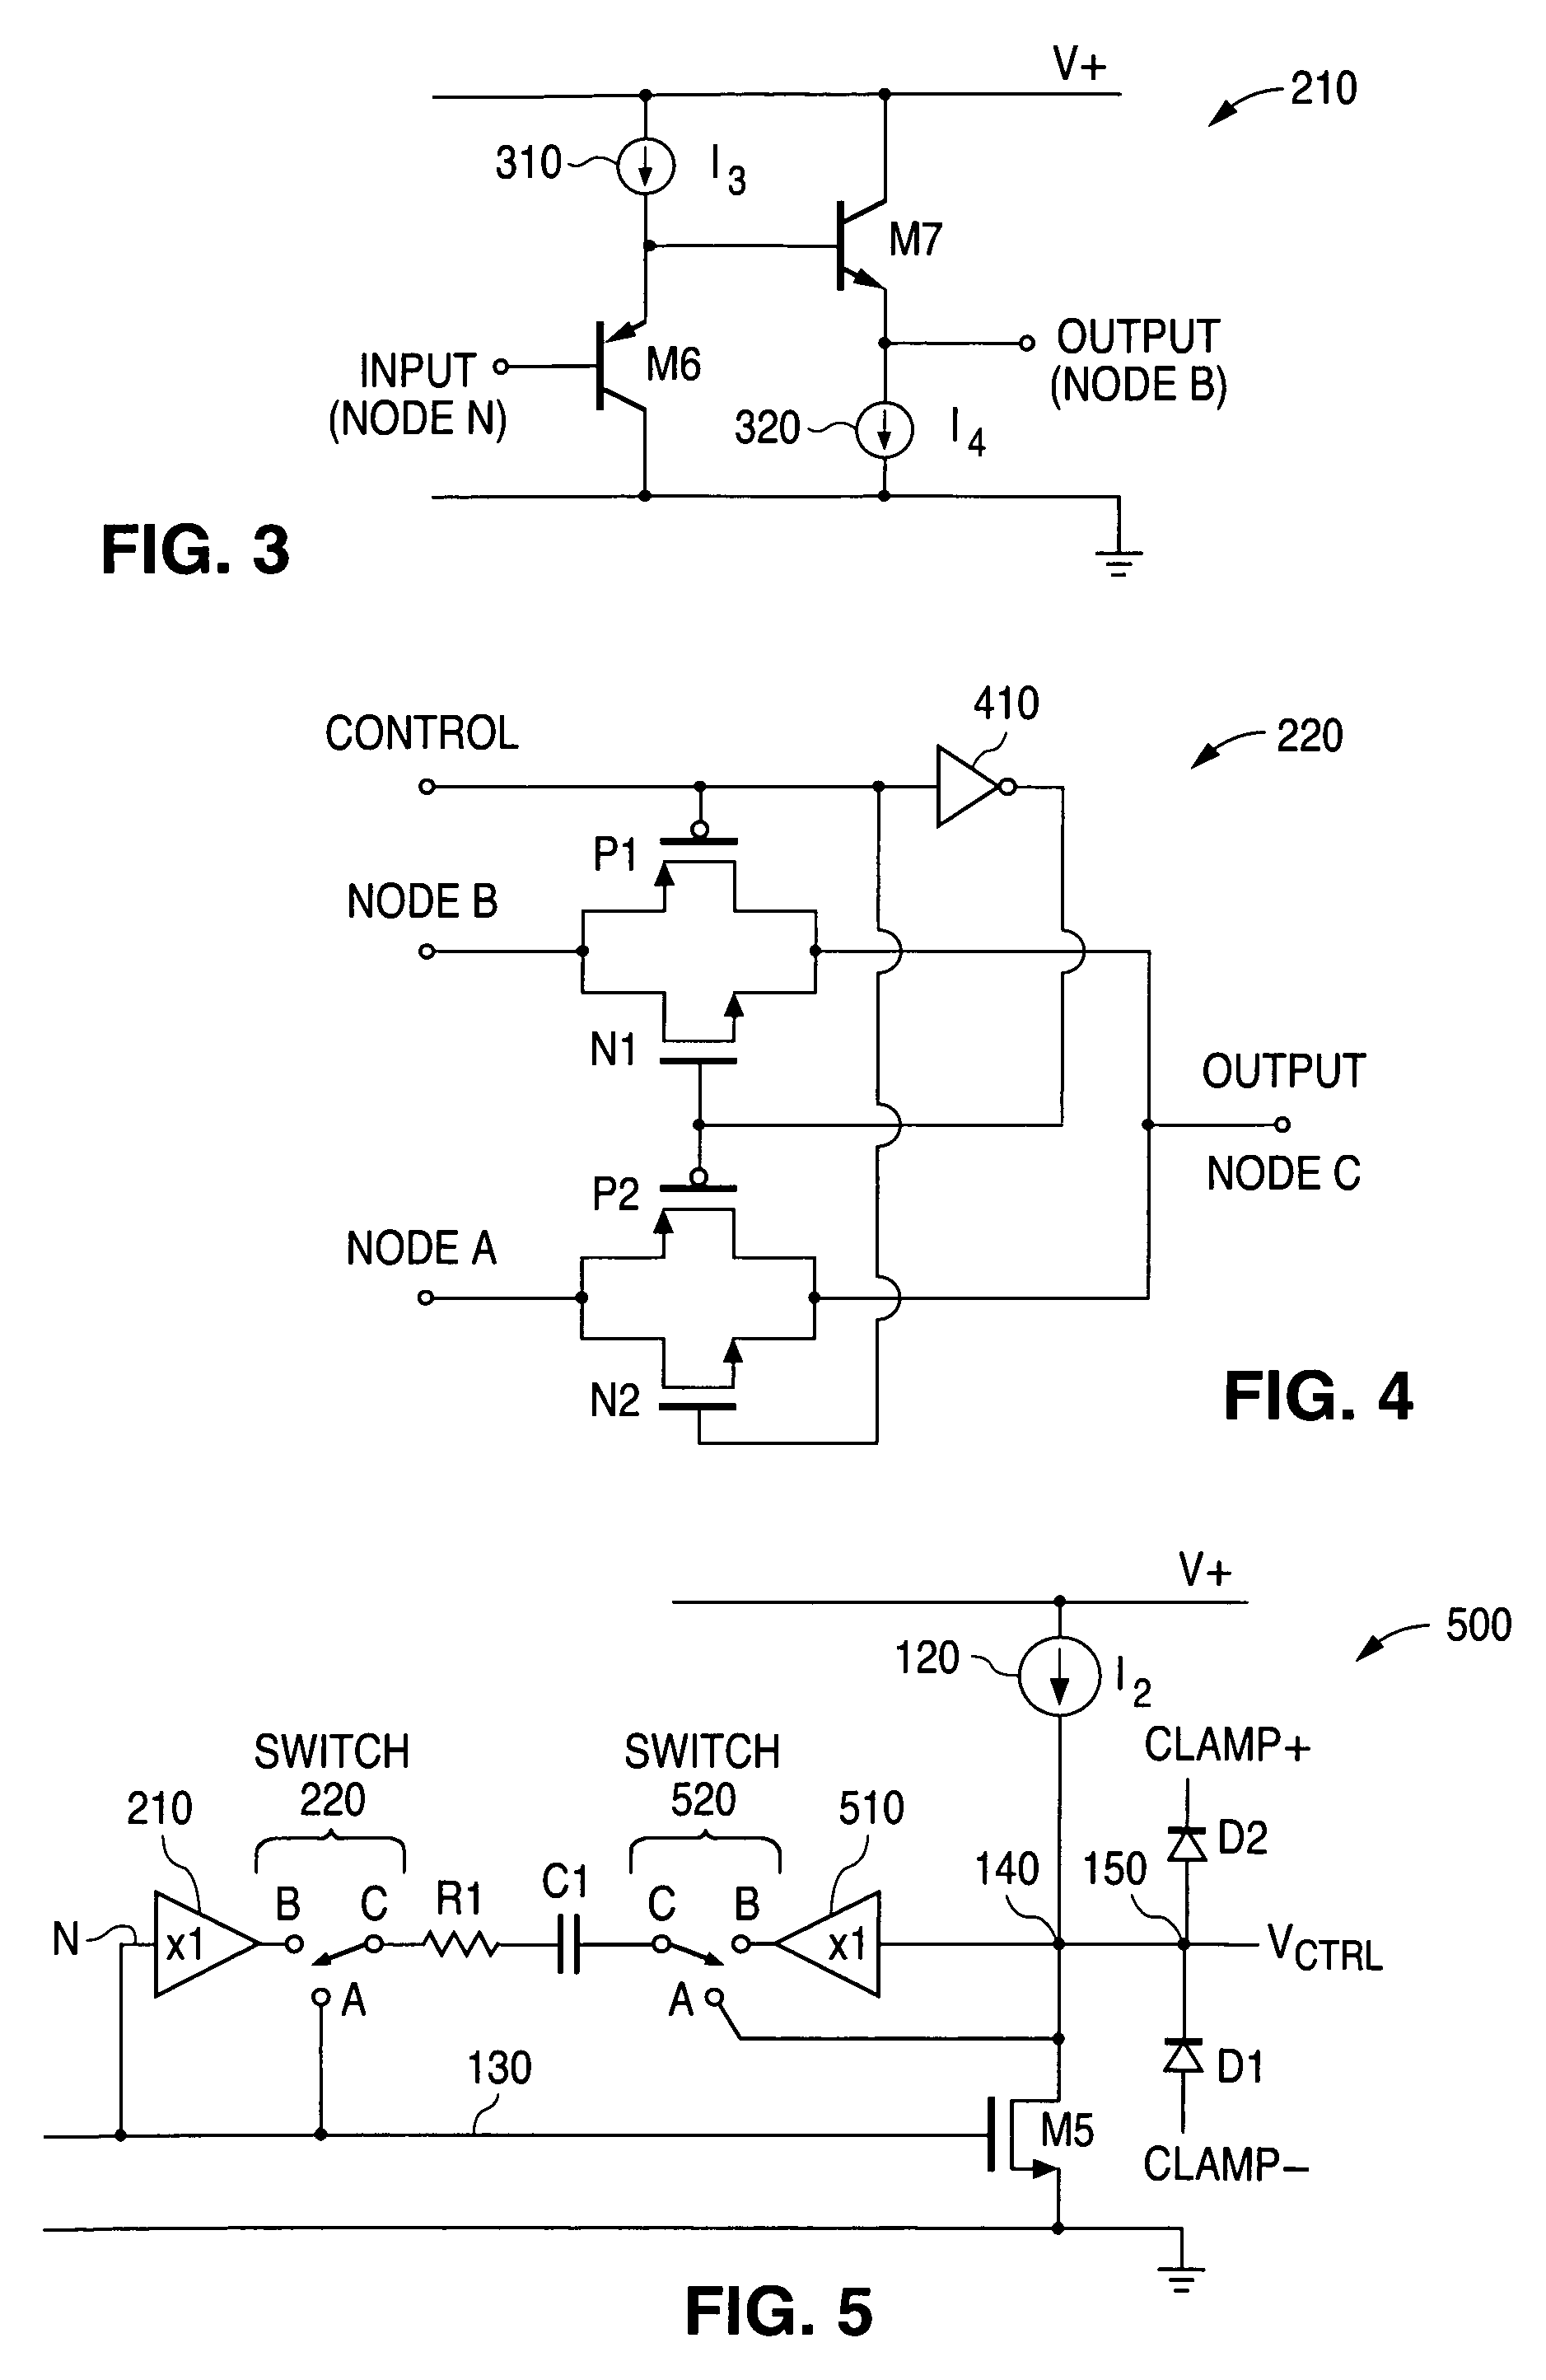 System and method for controlling an error amplifier between control mode changes